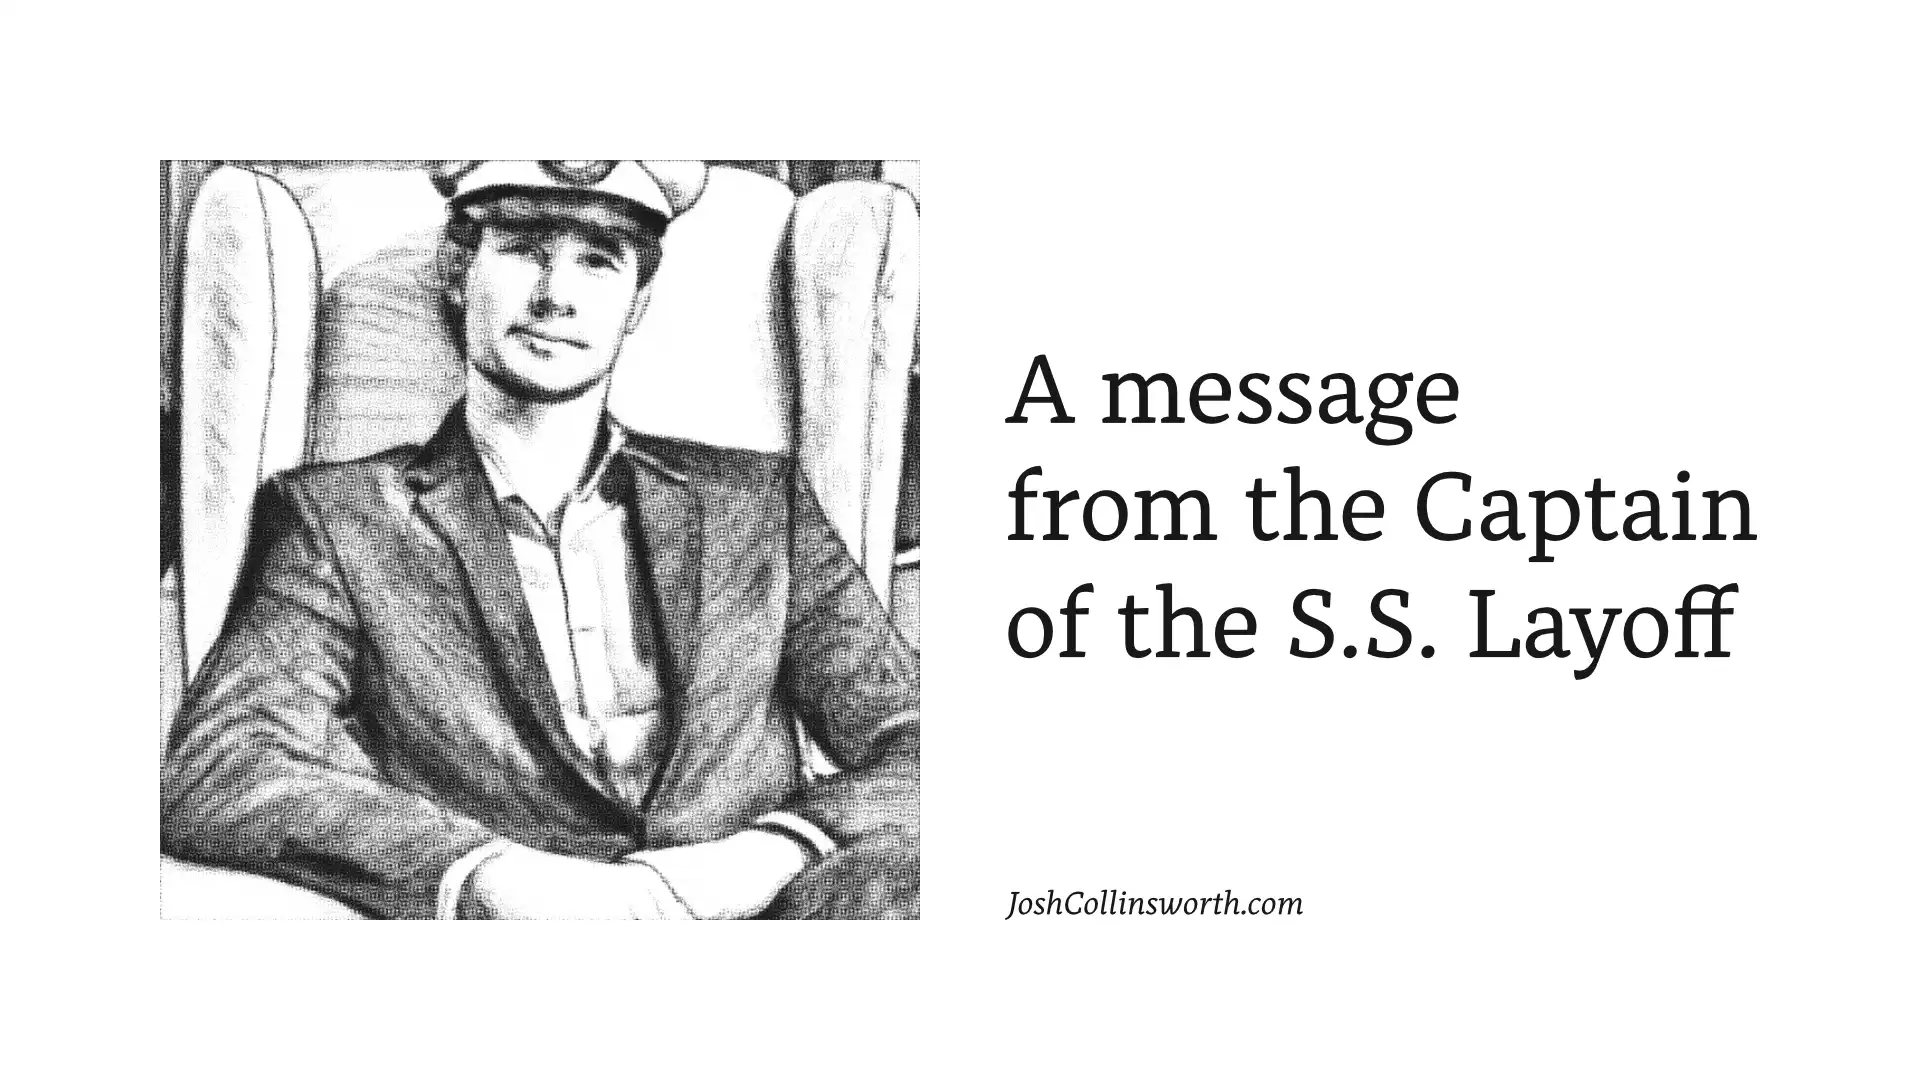 Preview image for A message from the Captain of the S.S. Layoff